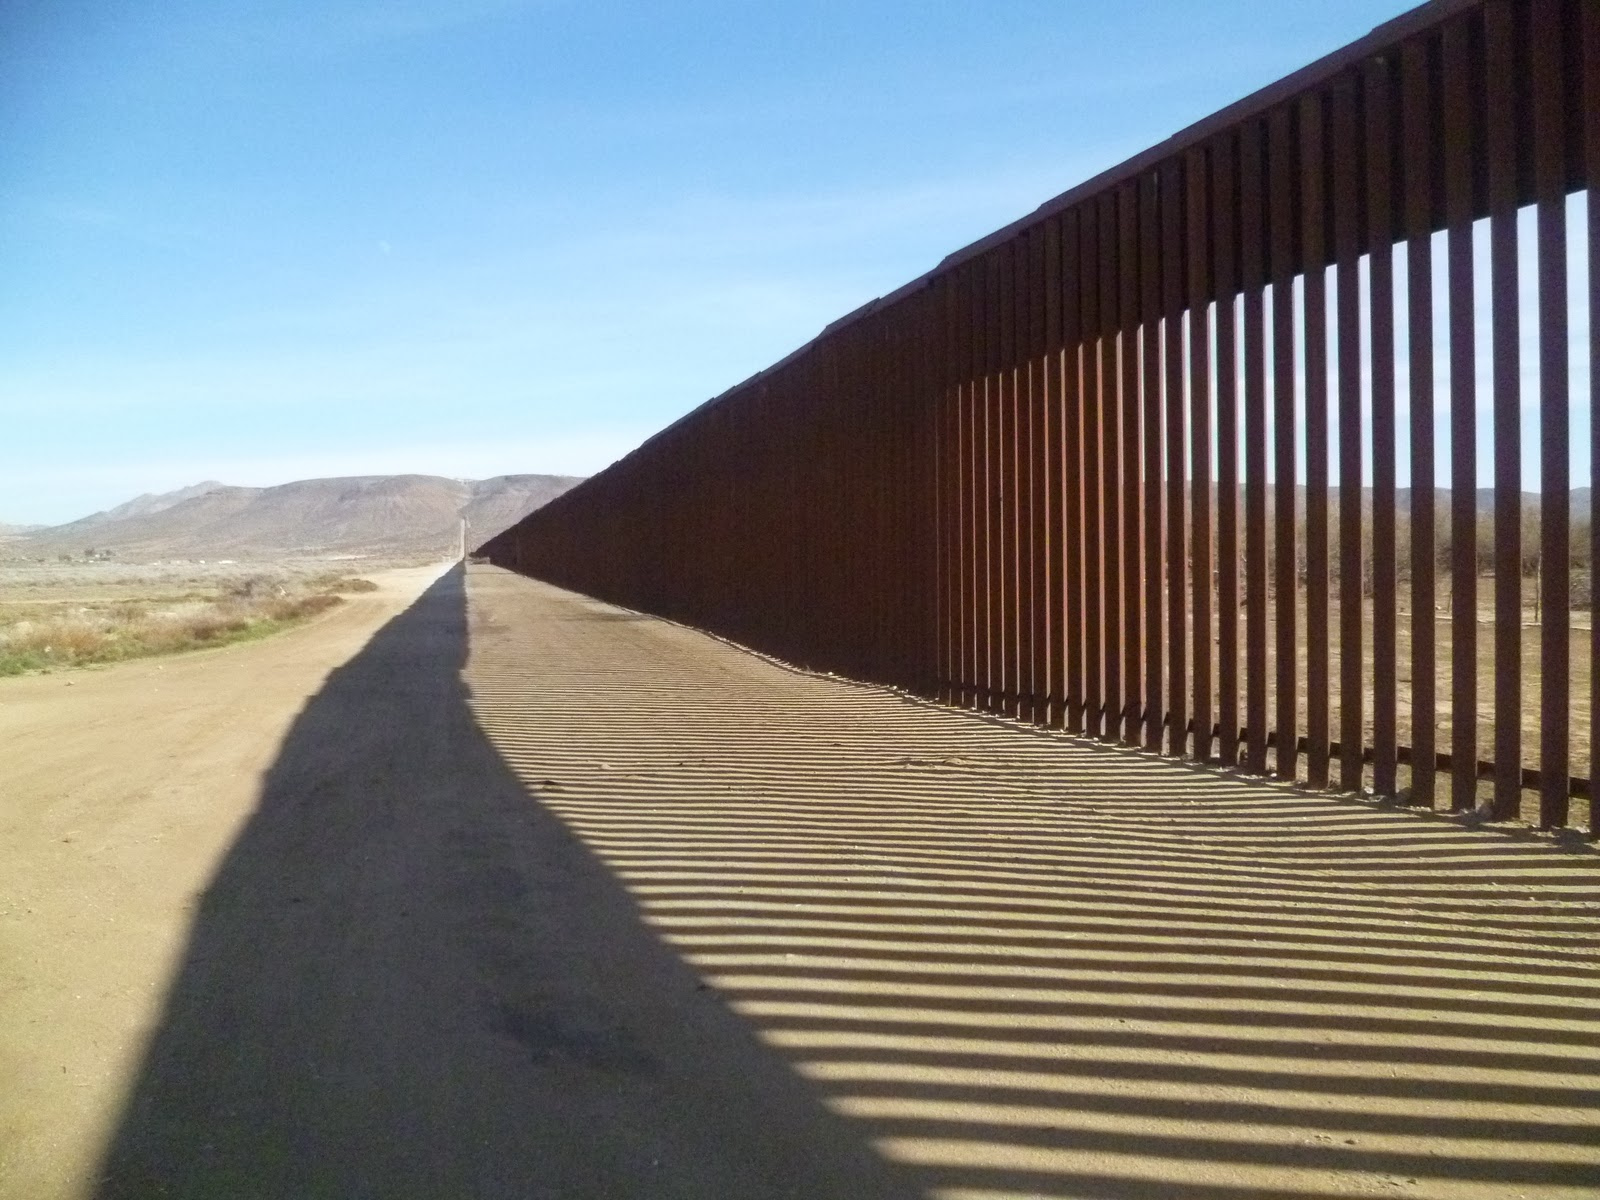 How a Border Wall Would Hurt the U.S. Economy